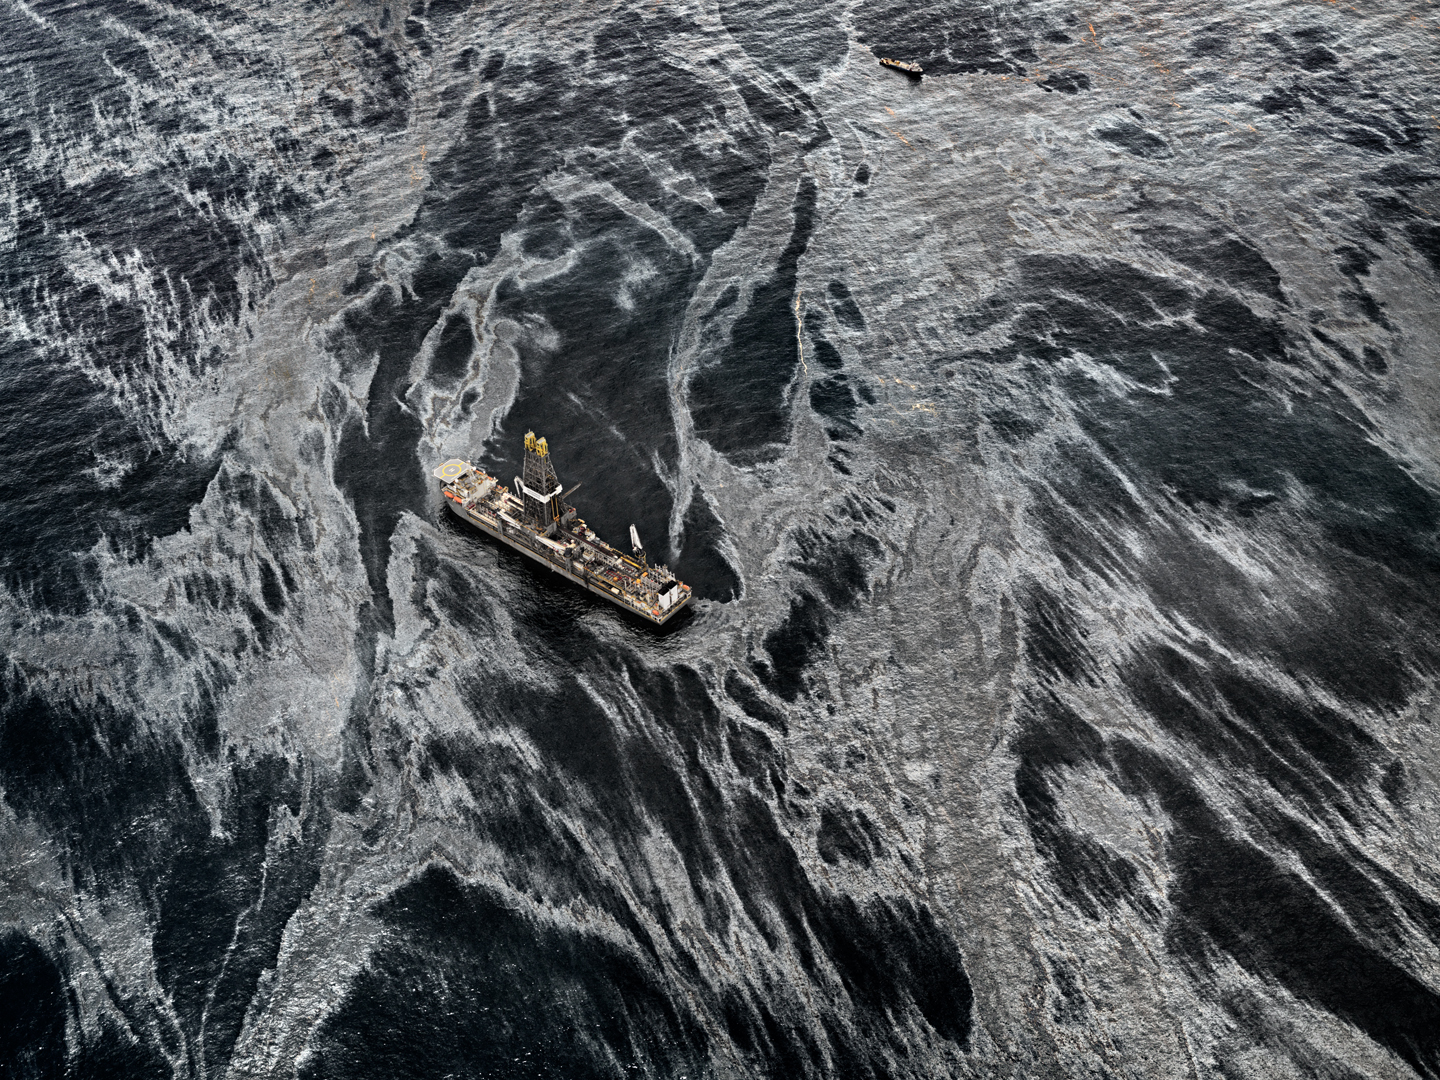 Edward Burtynsky: “Water” examines one of the world's most